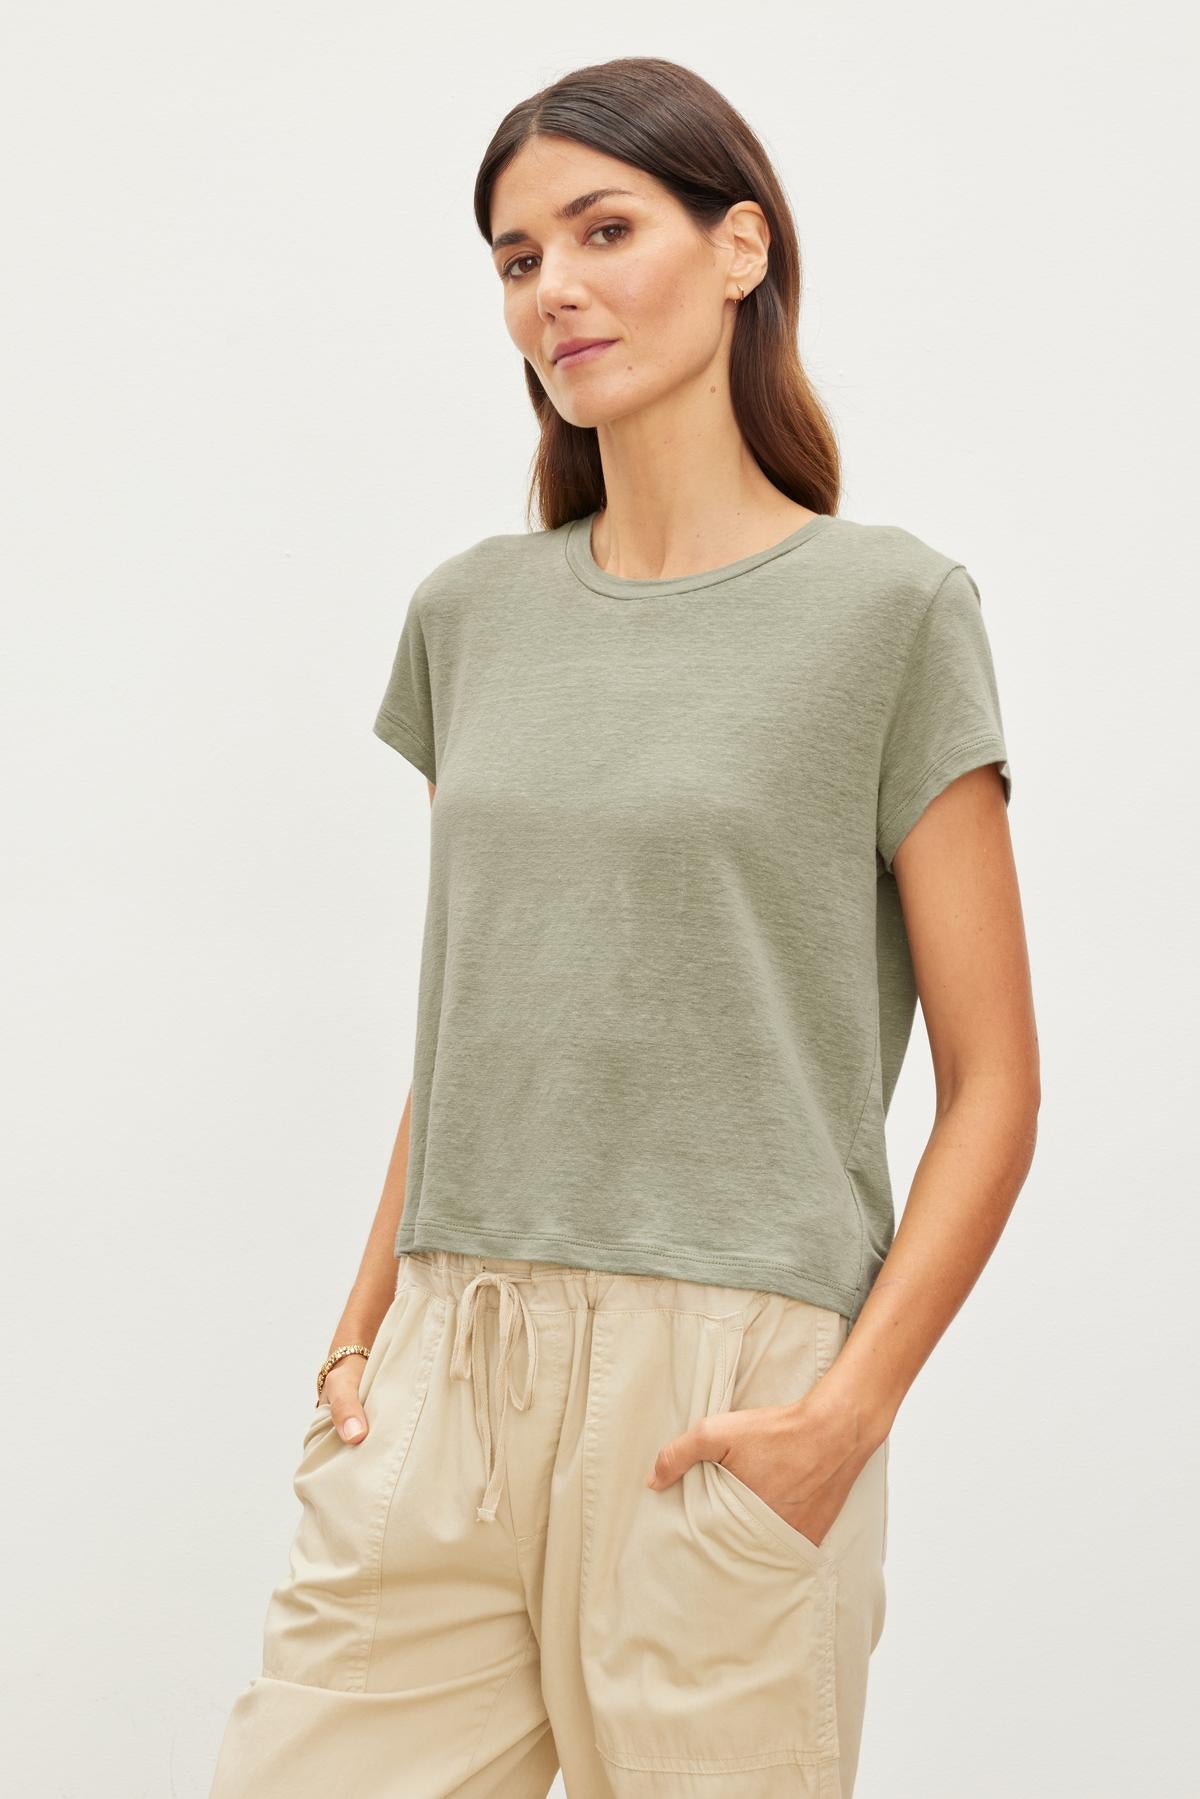   A woman in a Velvet by Graham & Spencer CASEY LINEN KNIT CREW NECK TEE and beige drawstring pants stands with her hands in her pockets, looking at the camera with a subtle expression. 